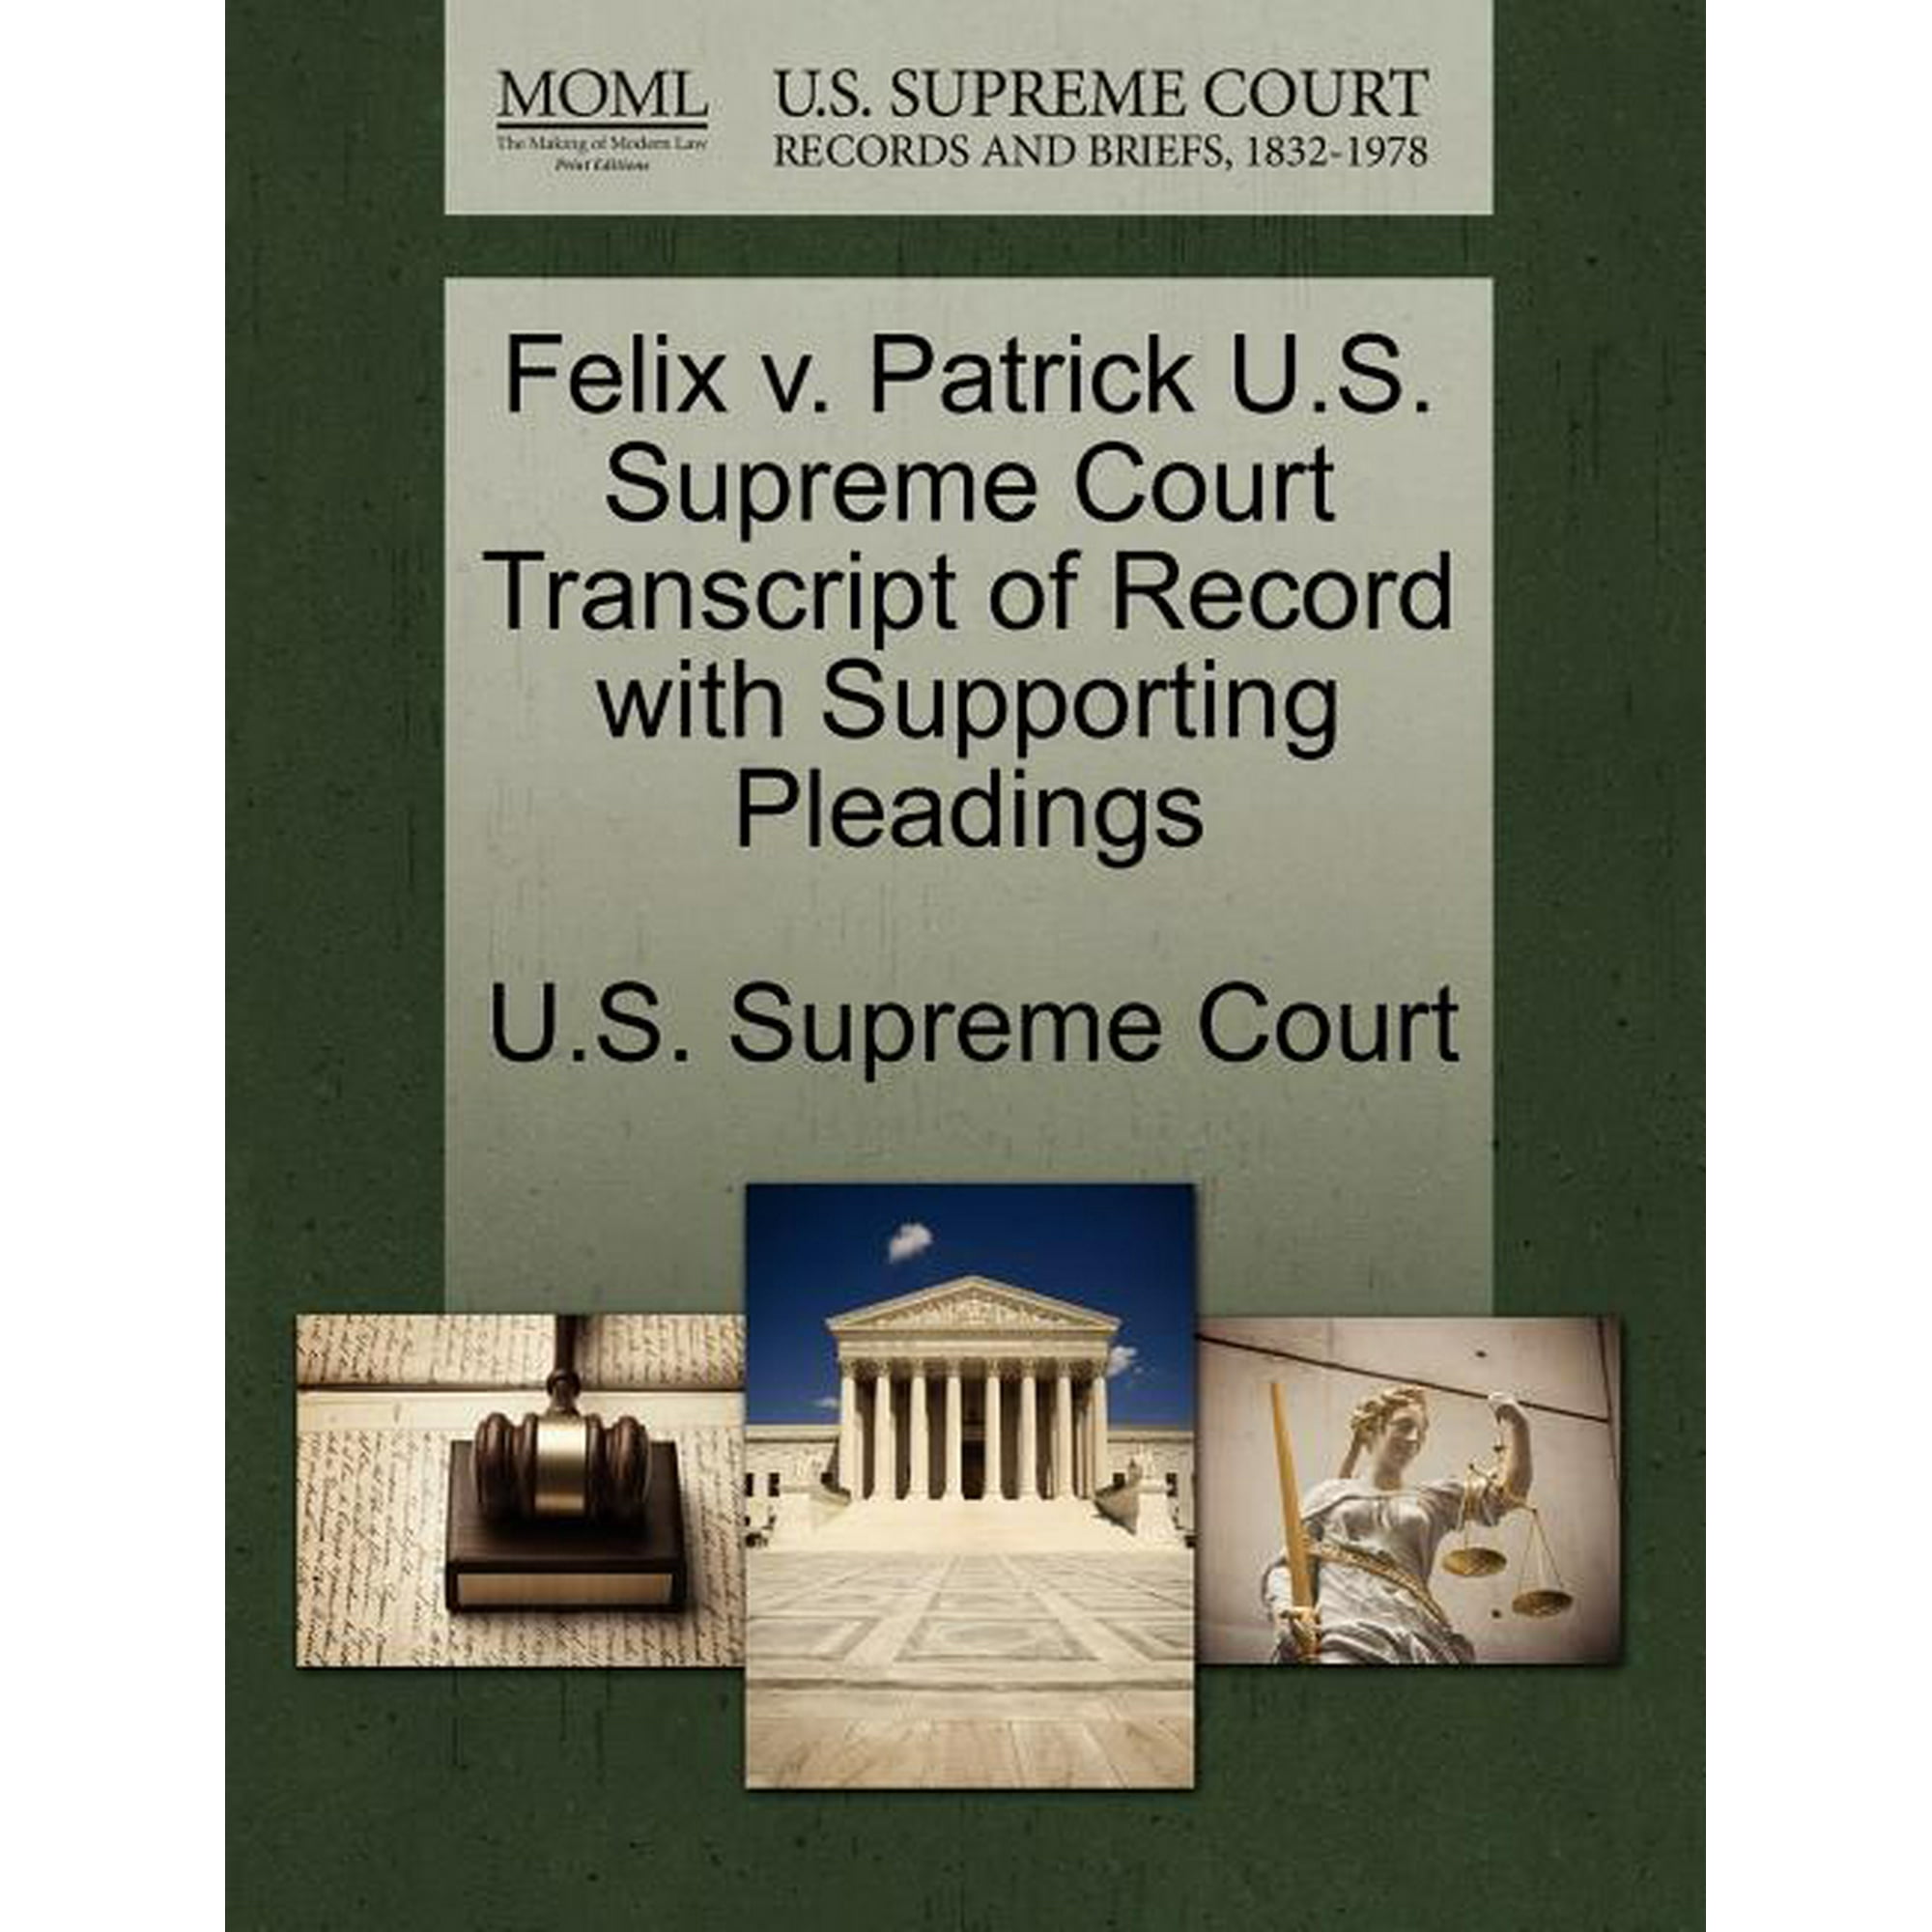 Felix V. Patrick U.S. Supreme Court Transcript of Record with Supporting  Pleadings